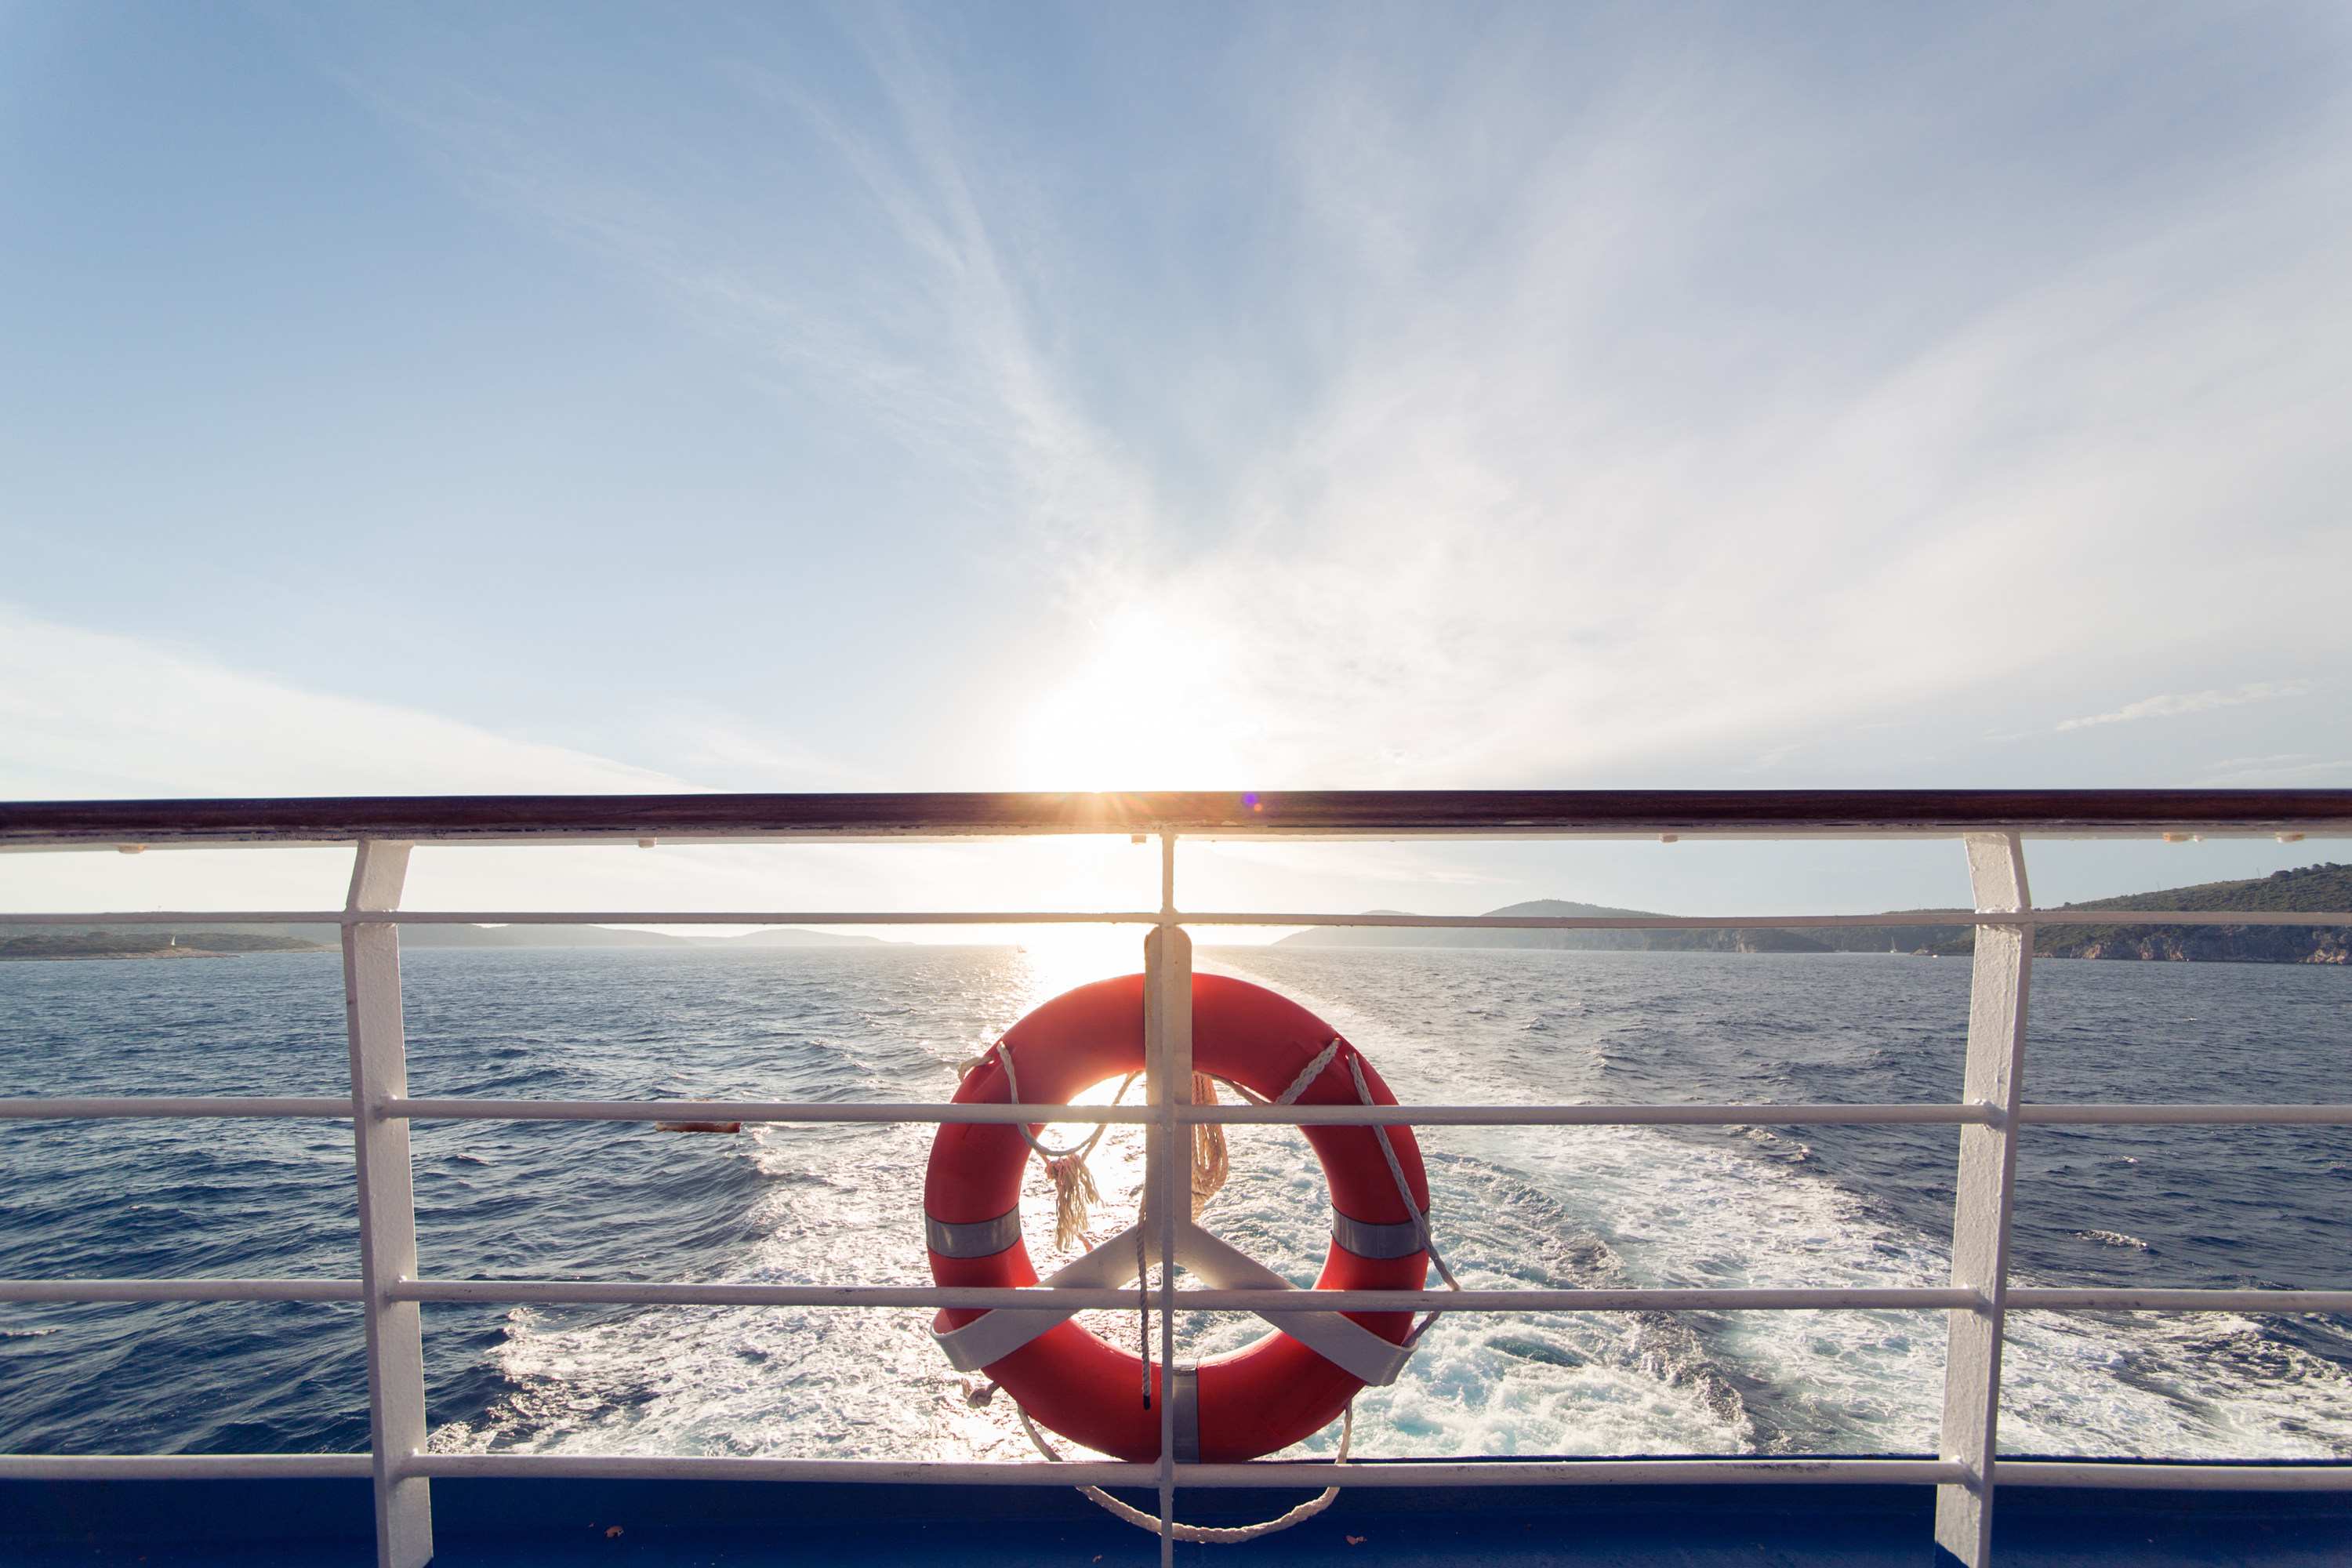 Marilyn Jones alleges Celebrity Cruises mishandled her husband’s body after he died while they were on a ship last year, saying it was left to decompose inside a walk-in cooler normally used for beverages. Photo: Shutterstock